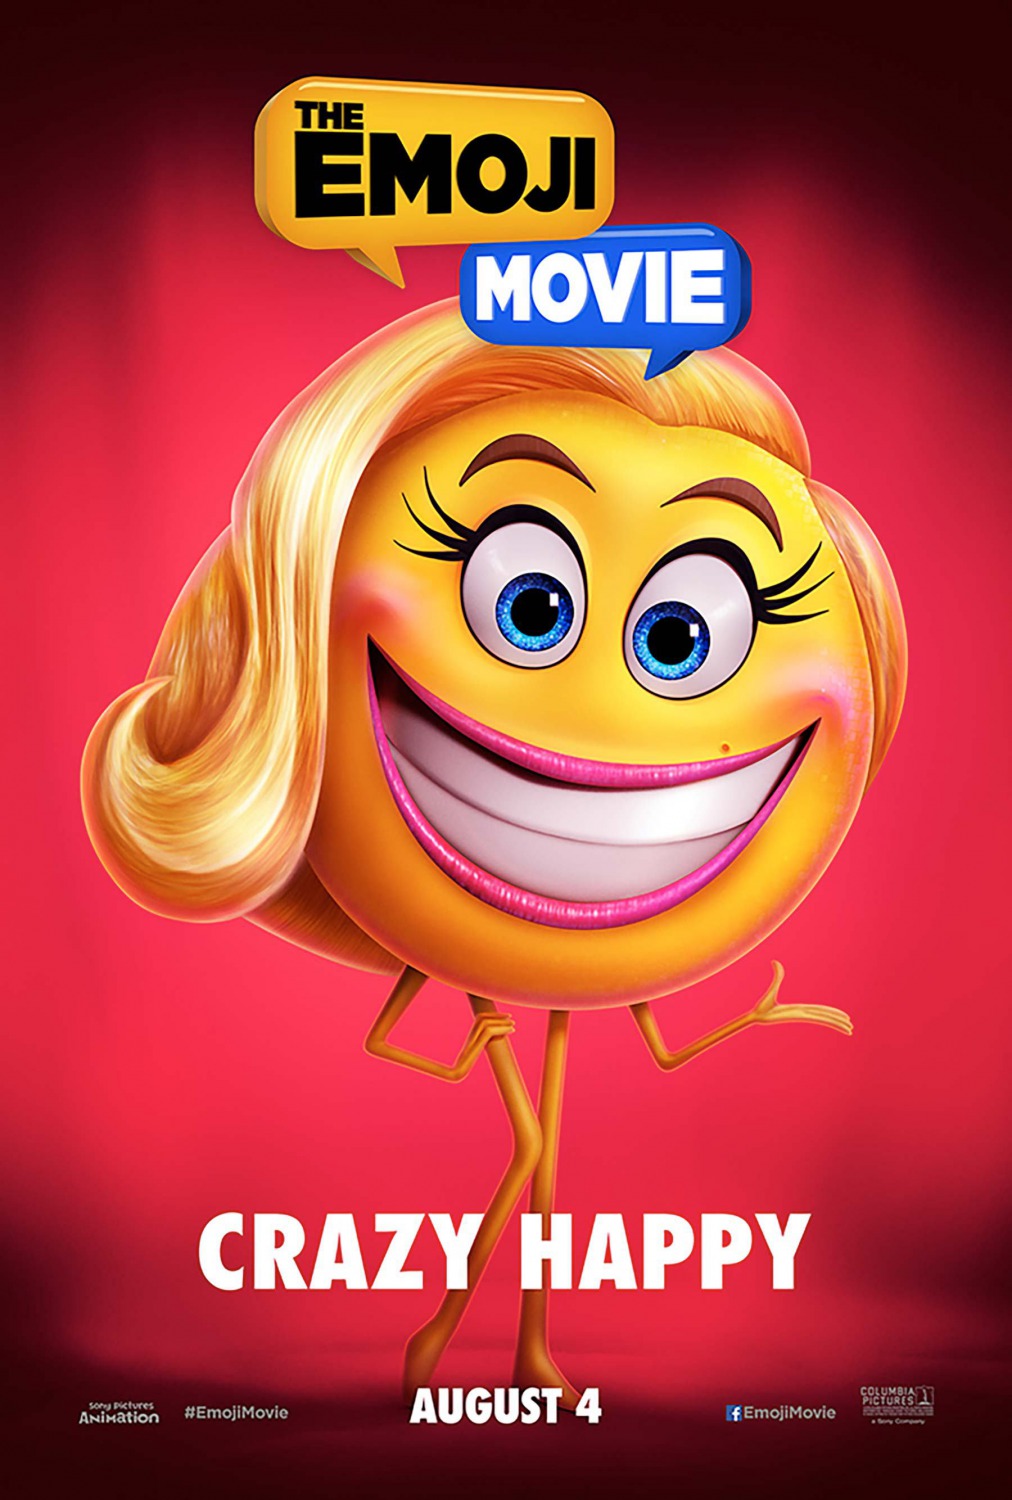 THE EMOJI MOVIE Trailers, Clips, Images and Posters | The Entertainment